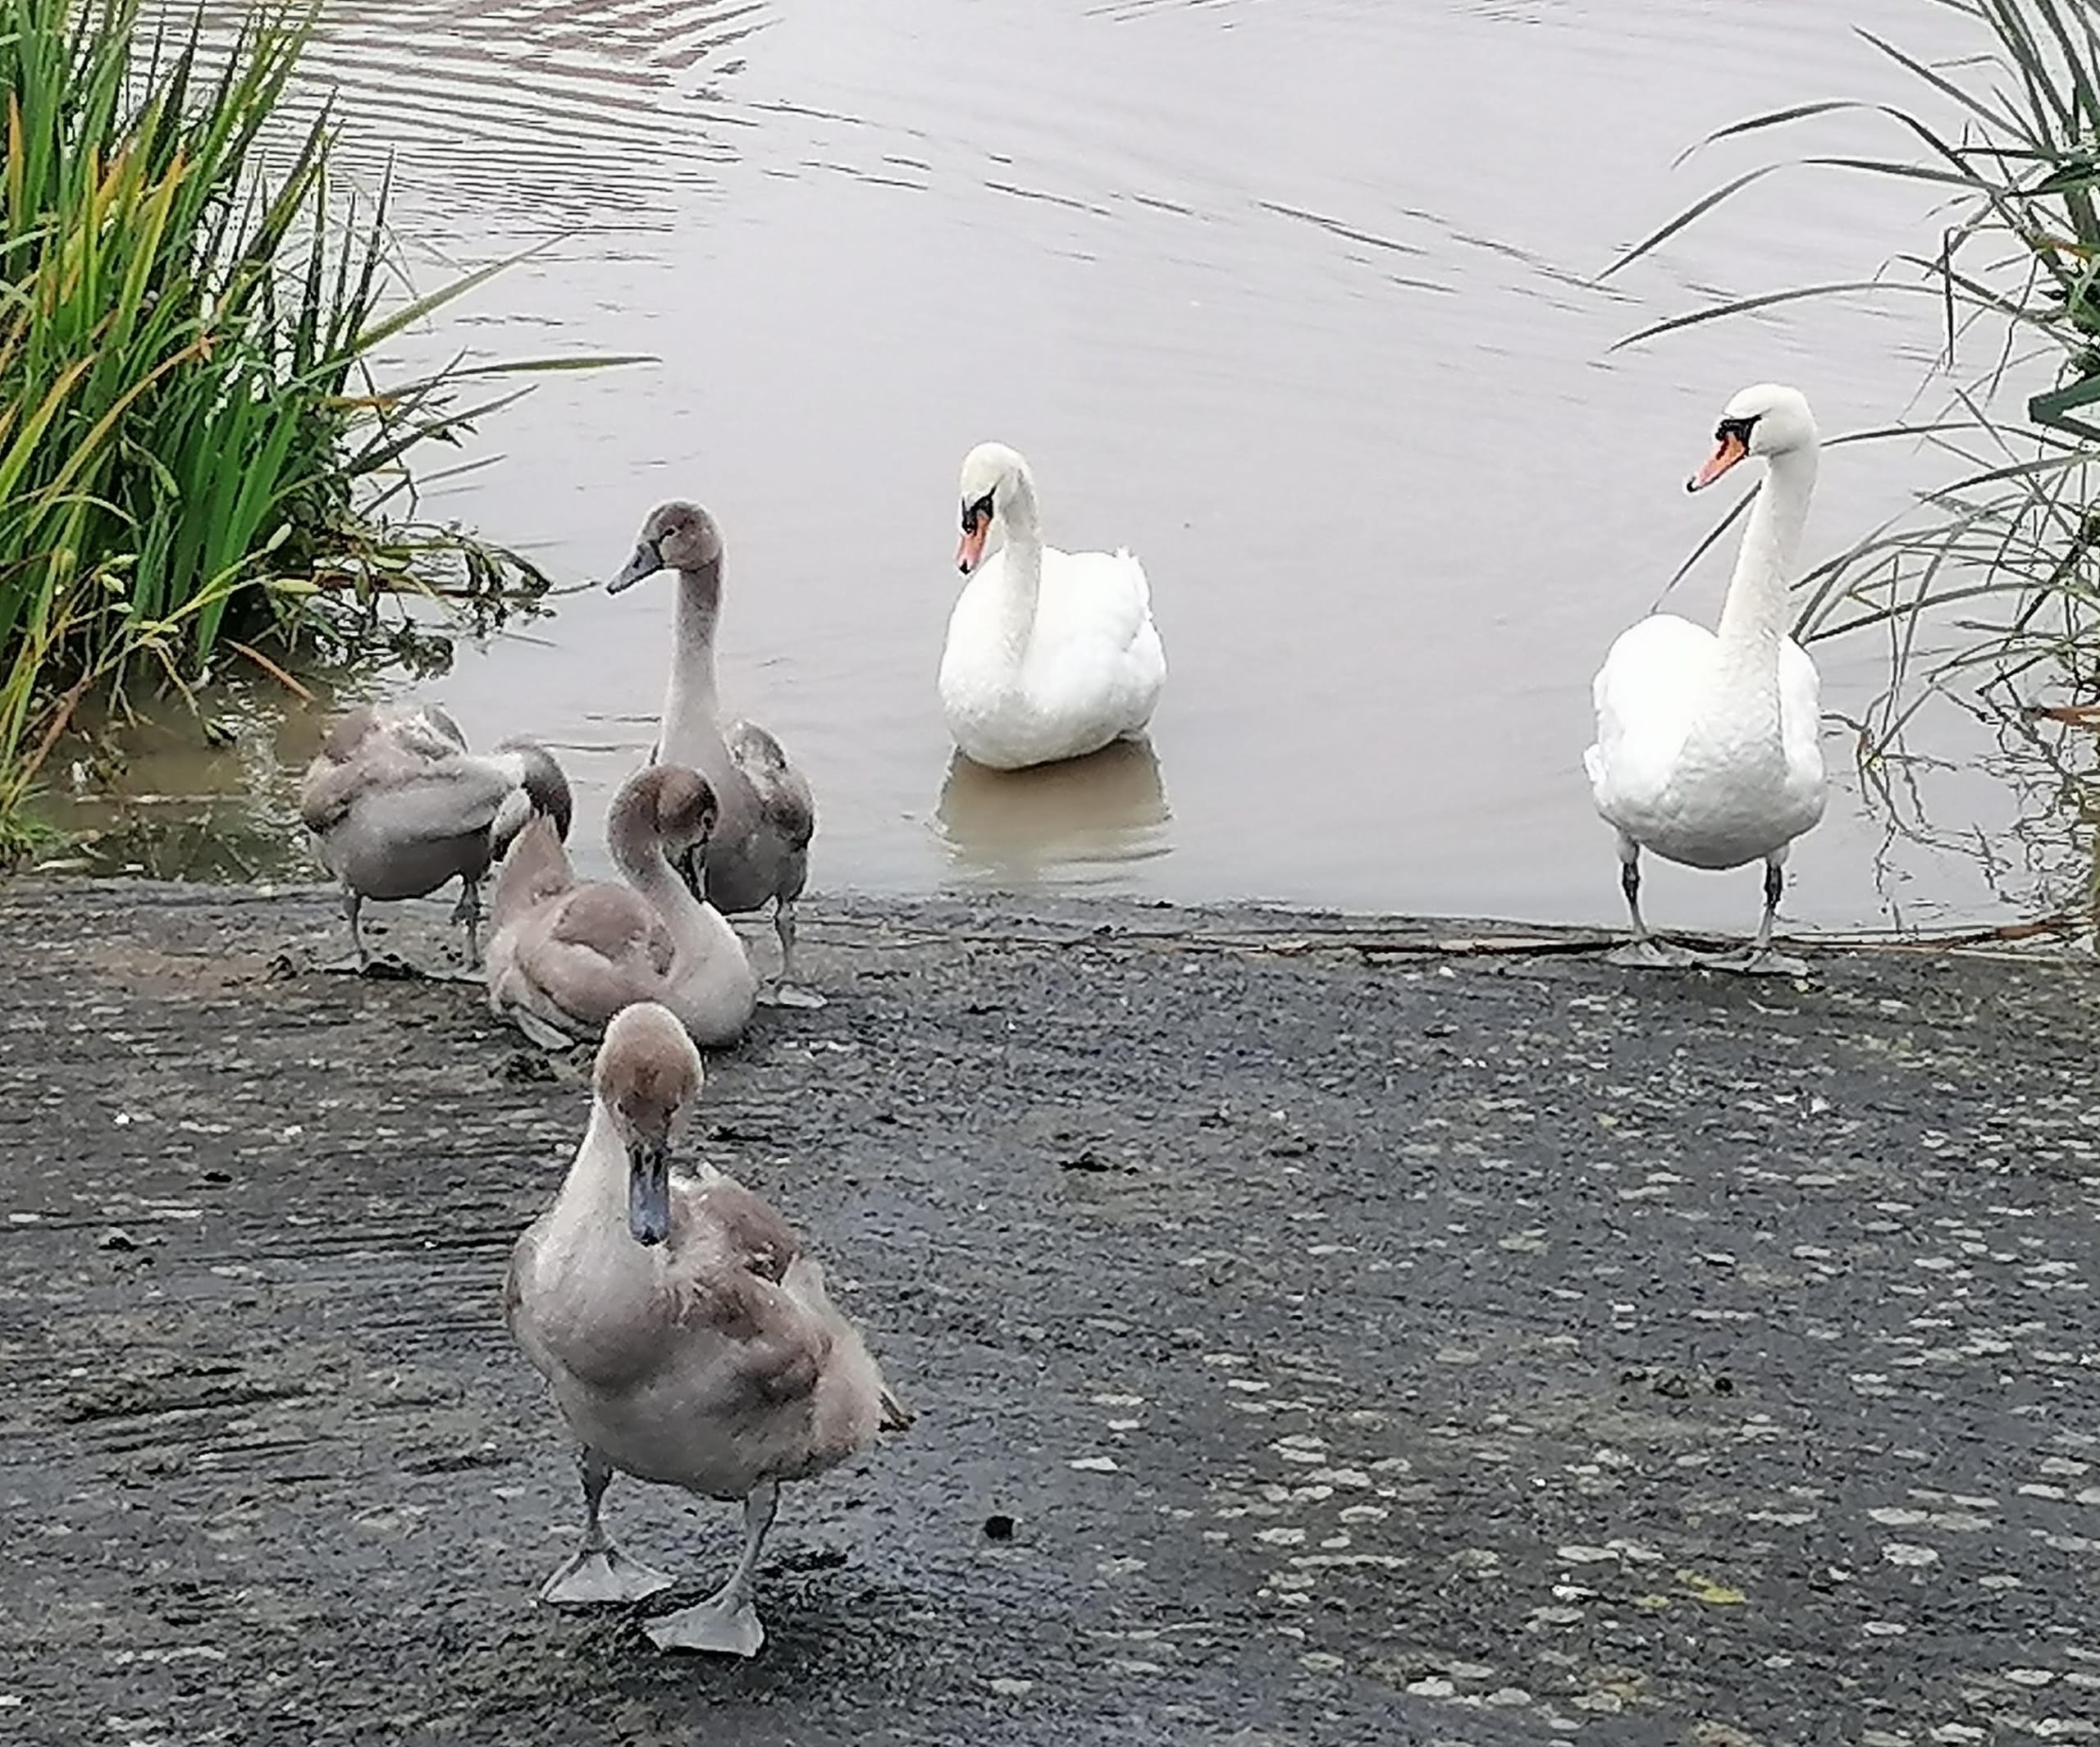 An image of swans with half grown cygnets